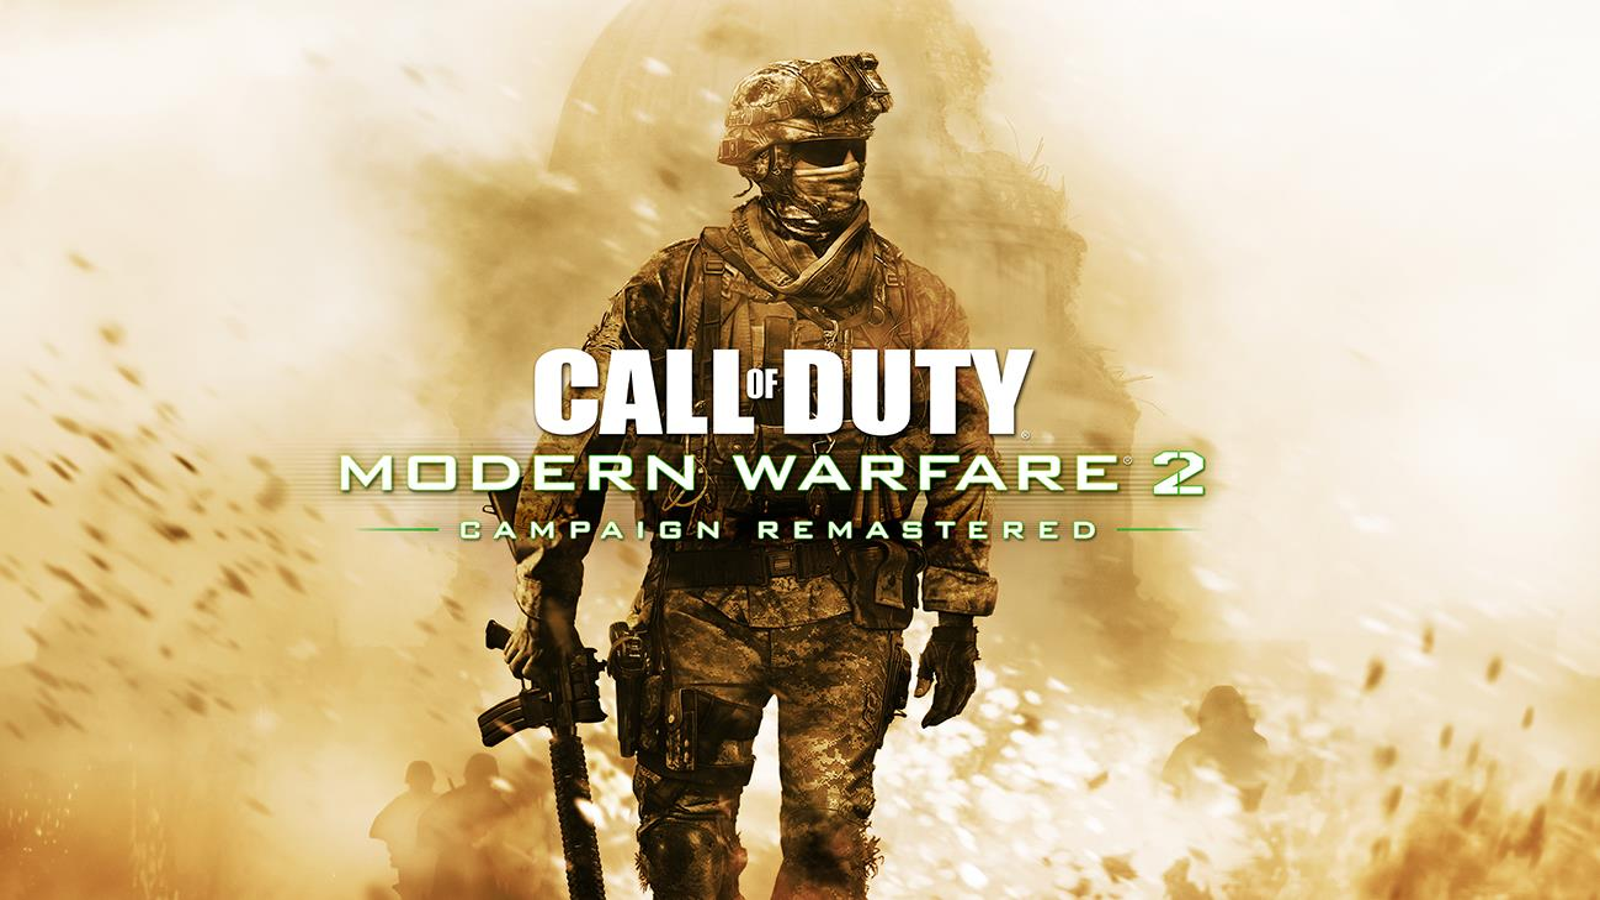 Call Of Duty Modern Warfare 3 Is Still Coming To PS4 And Xbox One - GameSpot